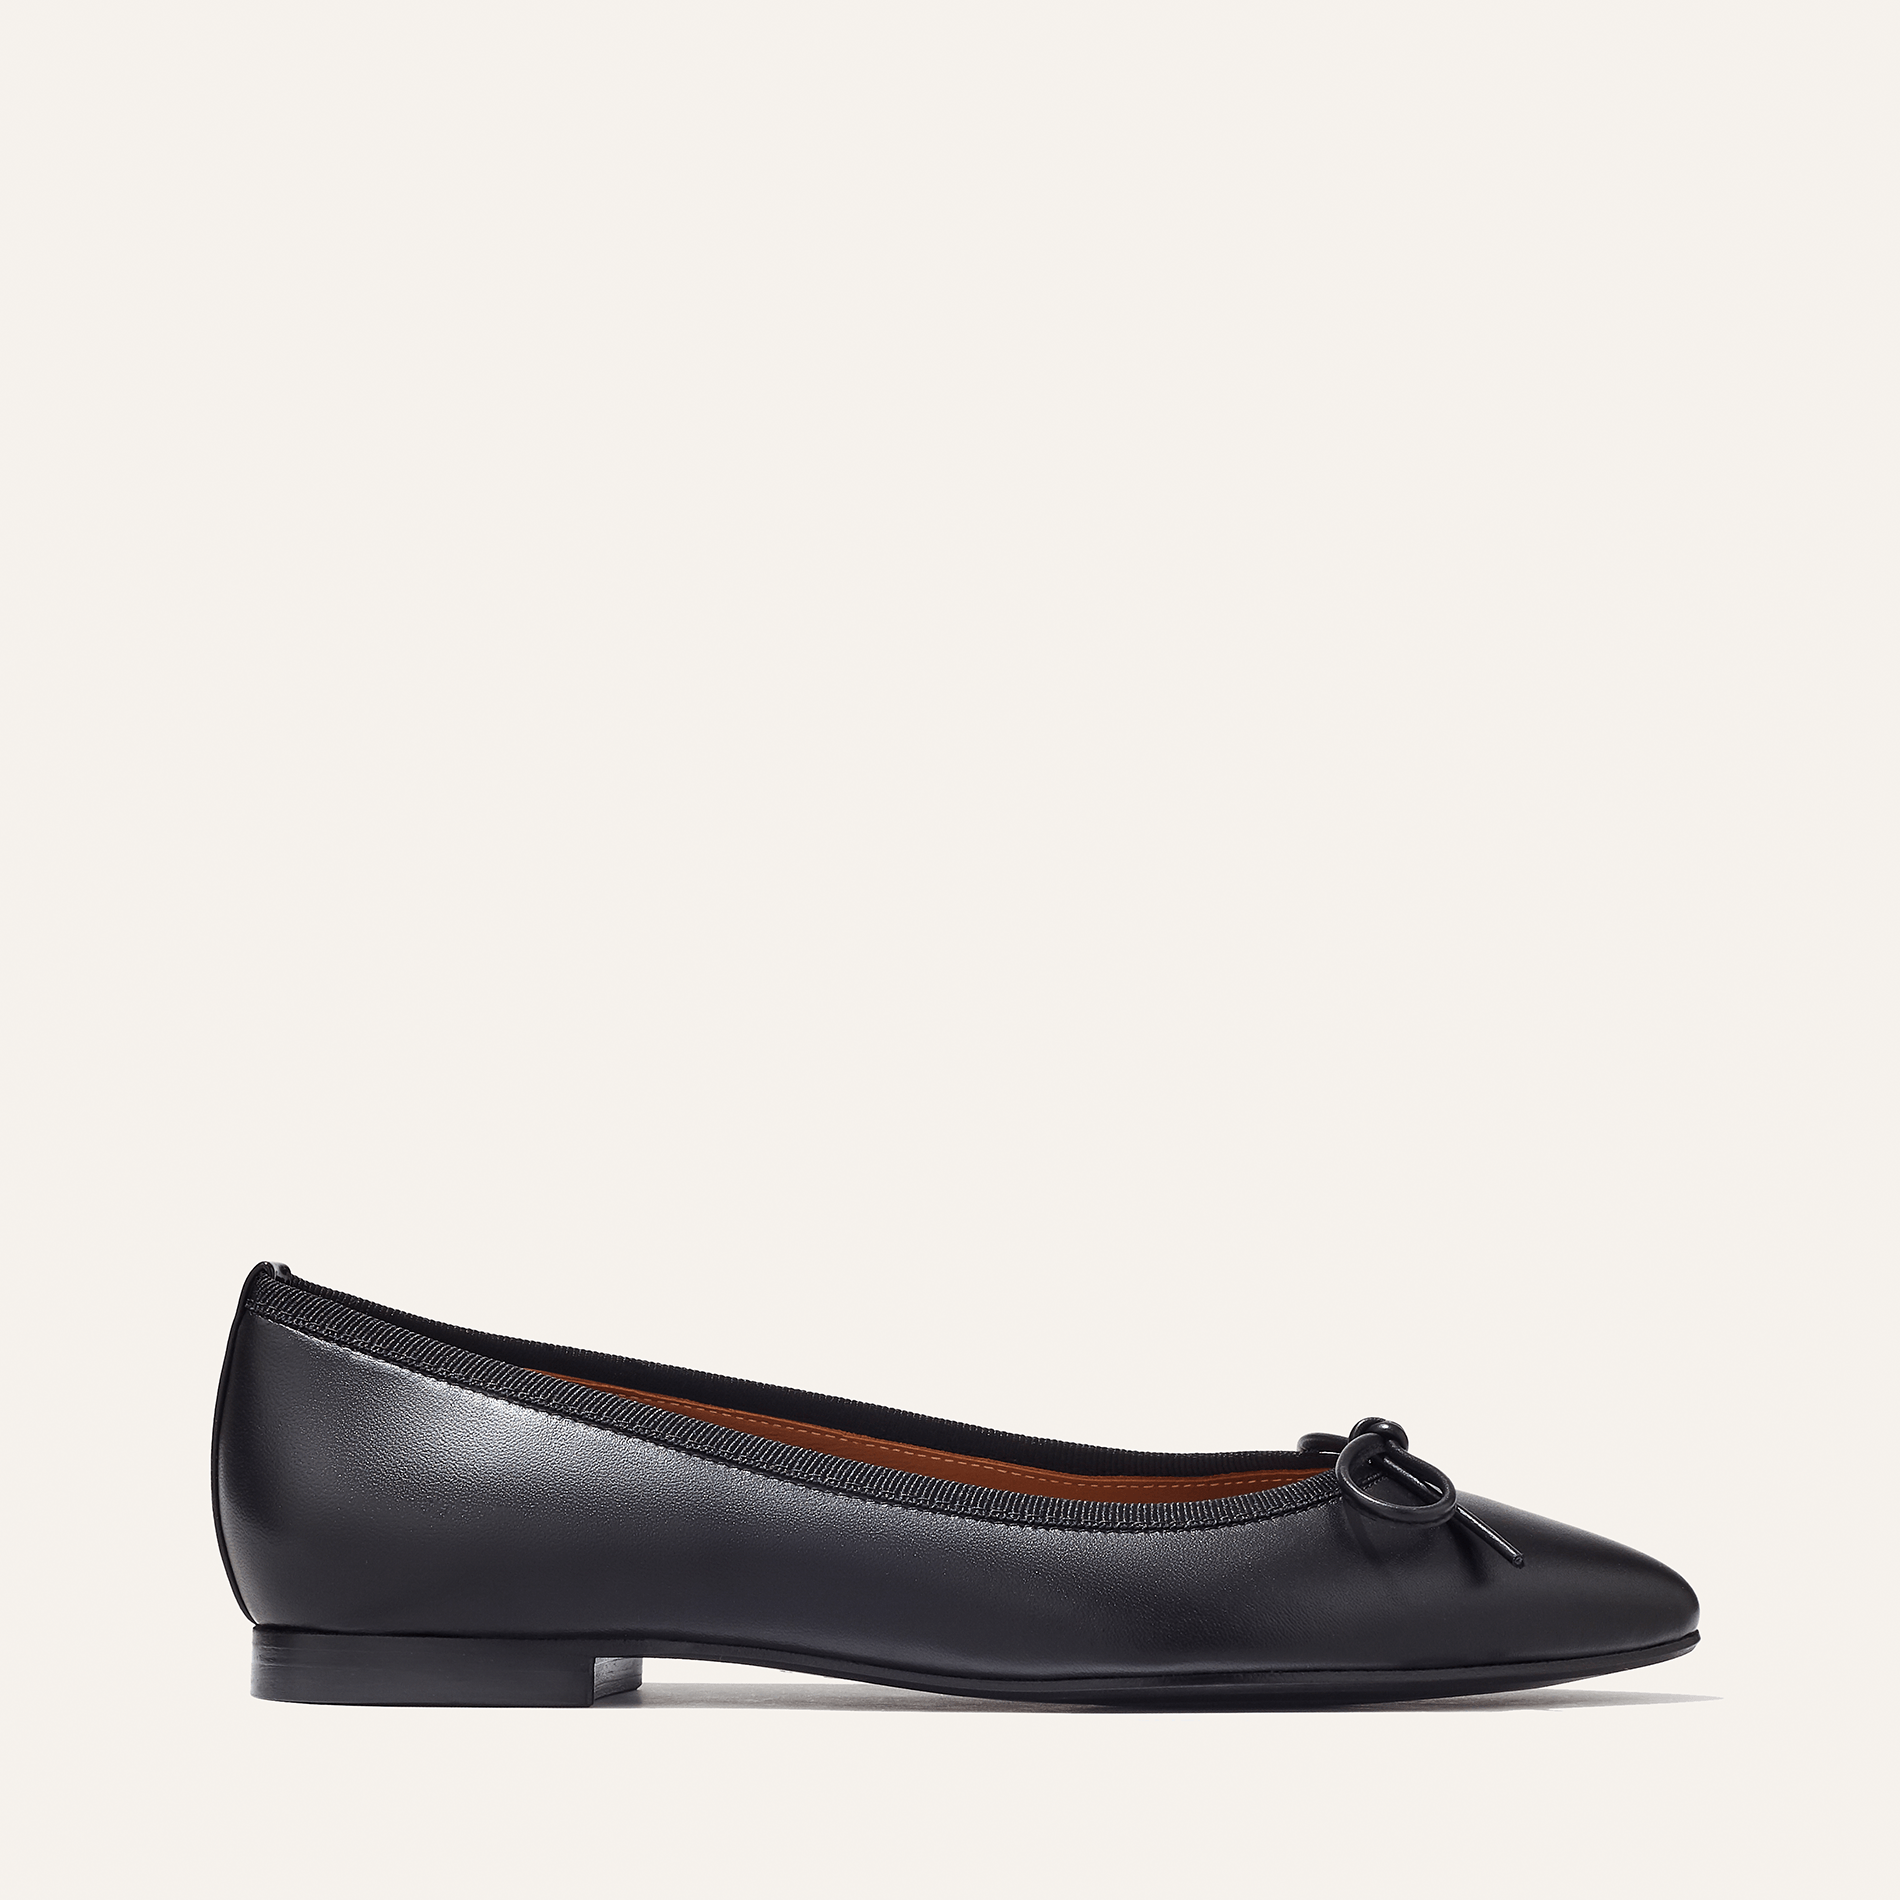 Margaux's classic and comfortable Pointe ballet flat in soft, black Italian nappa leather with an elegant pointed toe